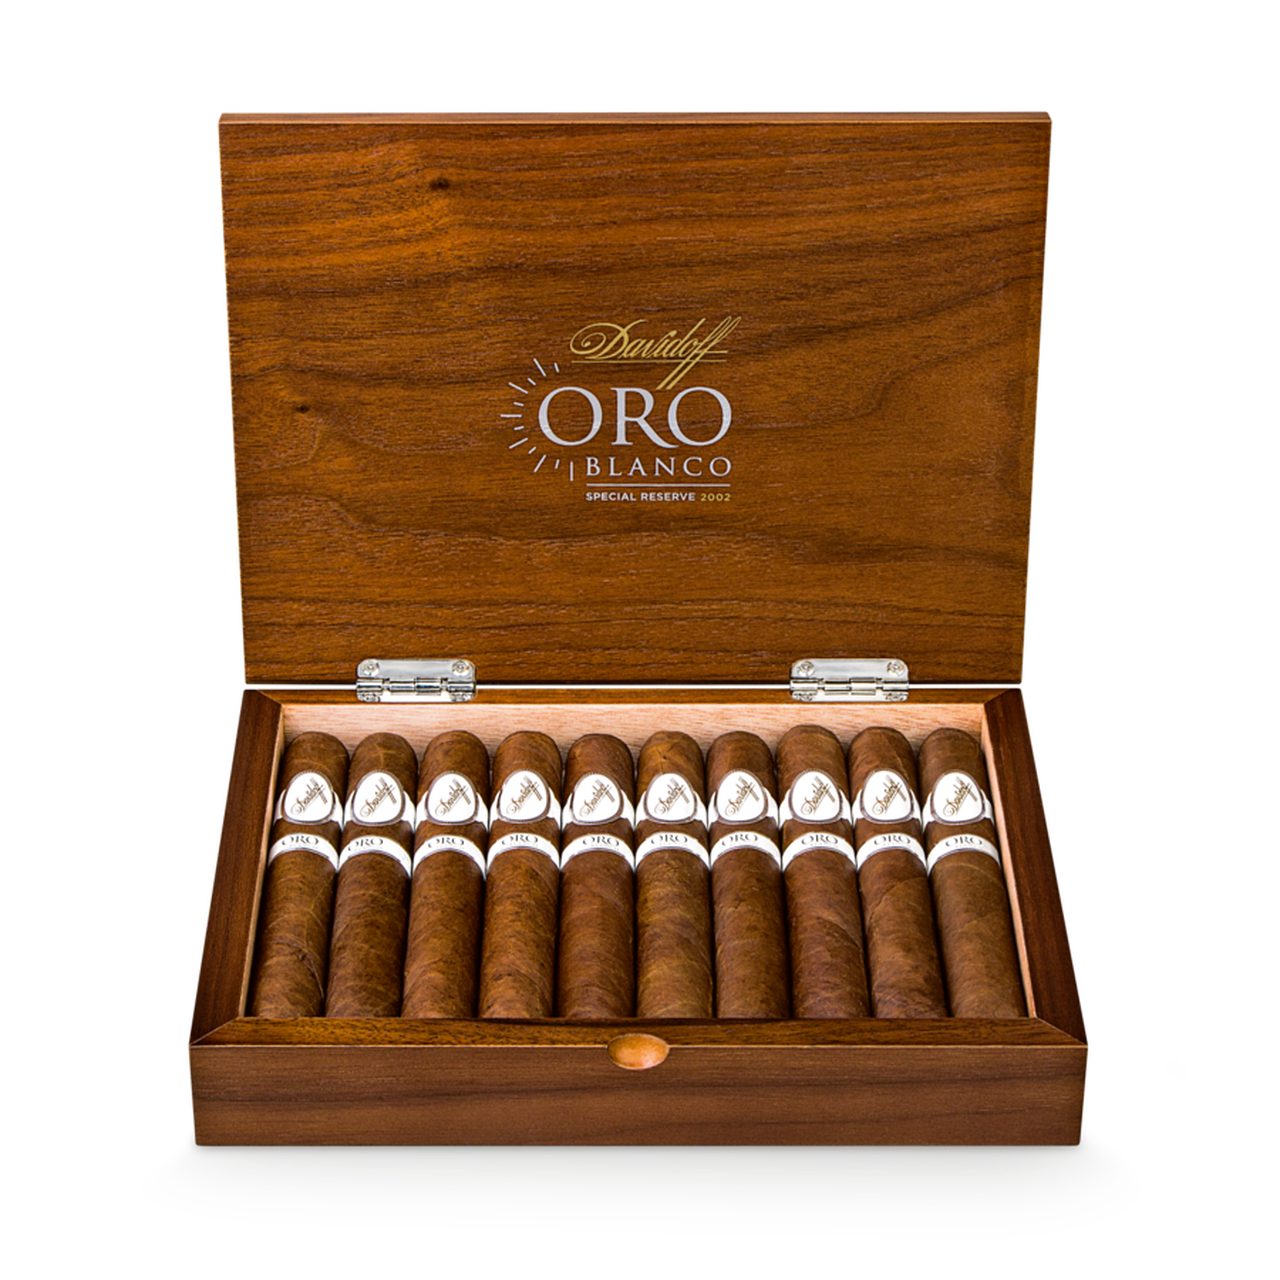 After Almost a Decade Davidoff Raises The Price of Oro Blanco